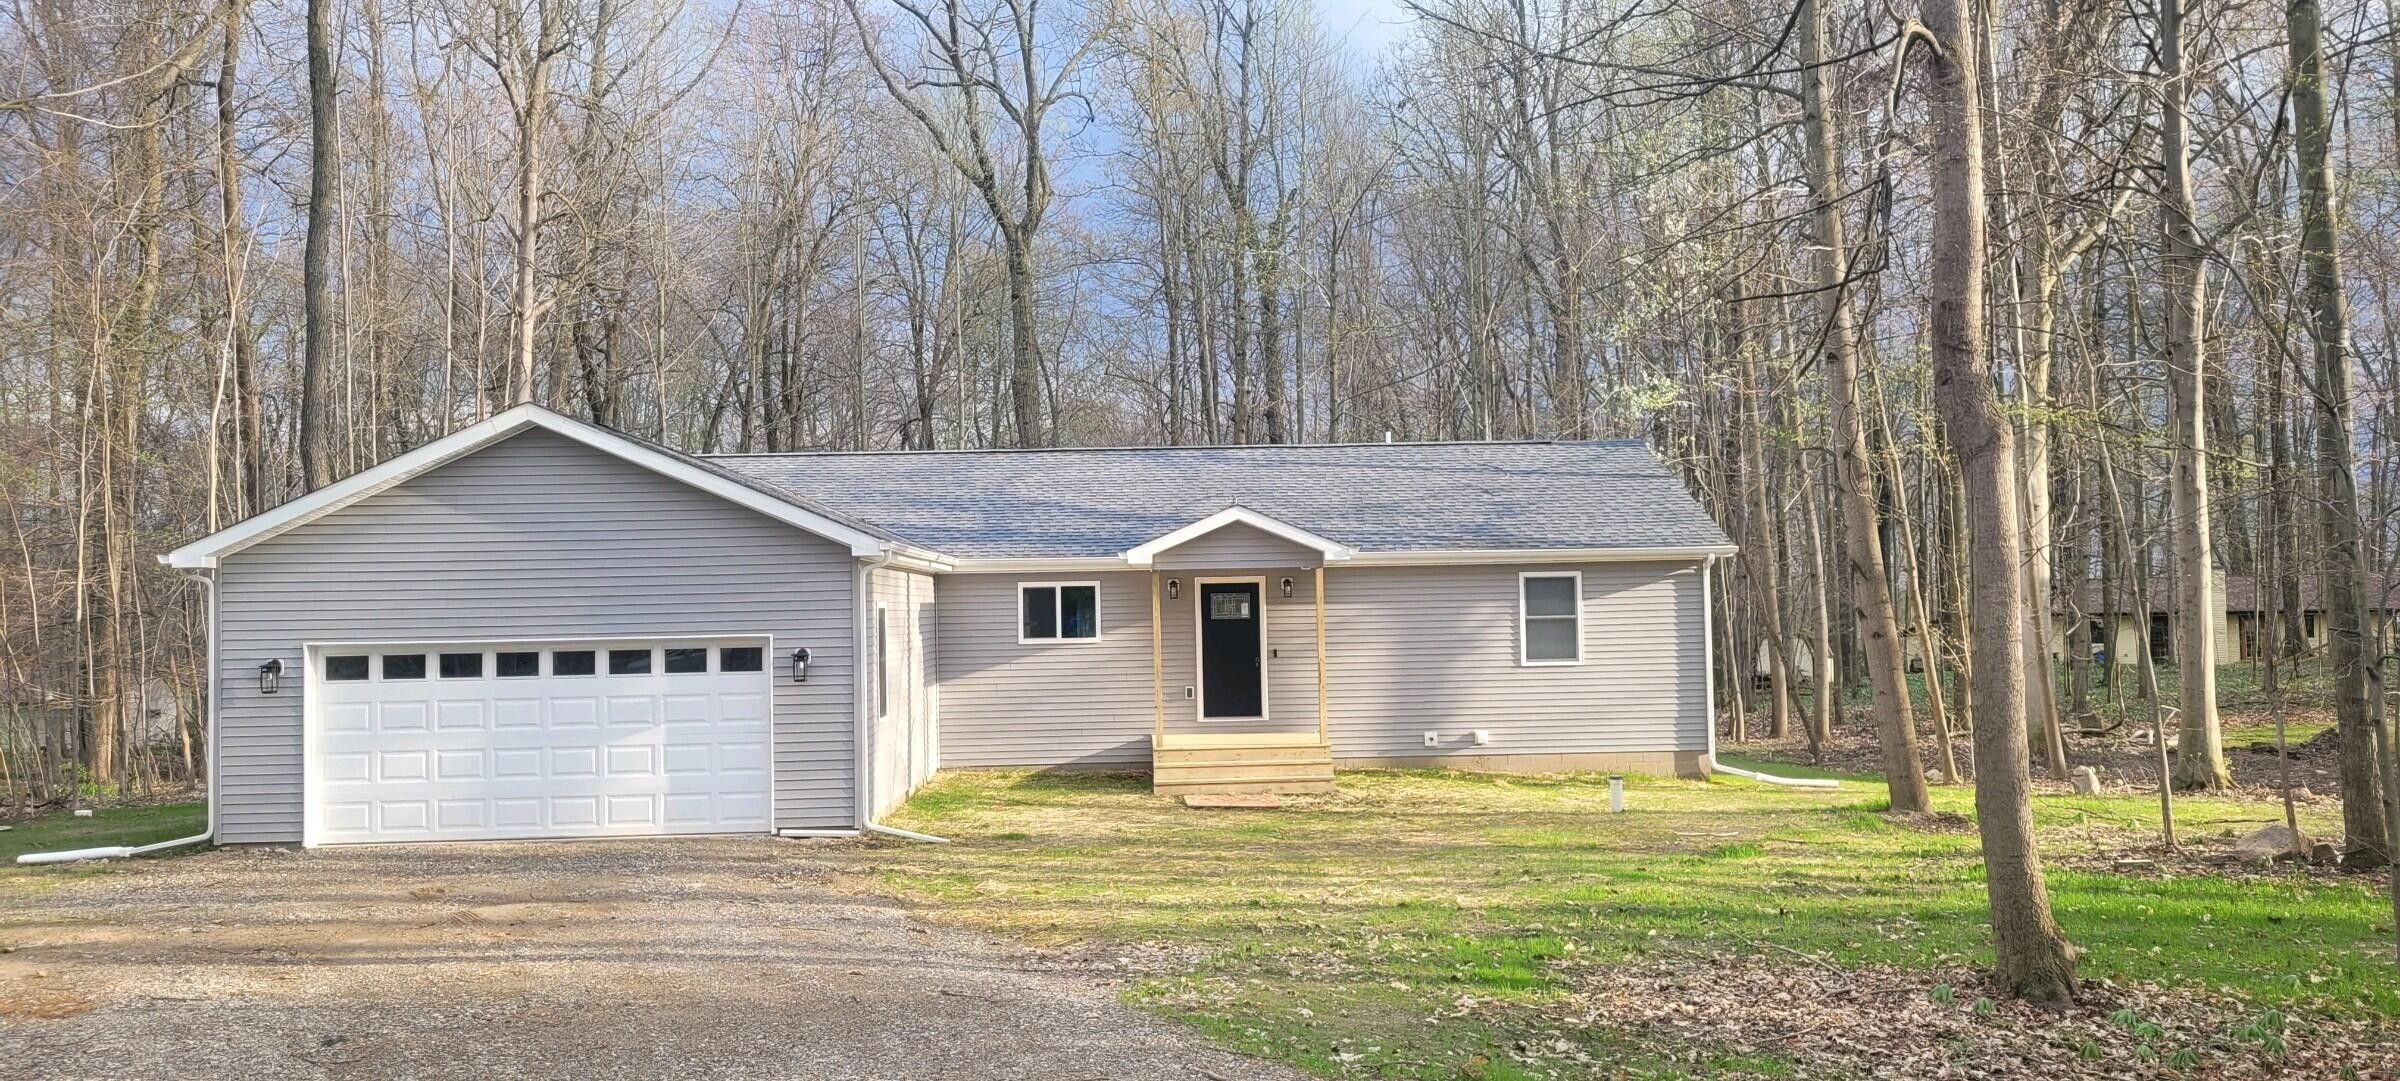 8427 Roscommon Court. Onsted, MI 49265